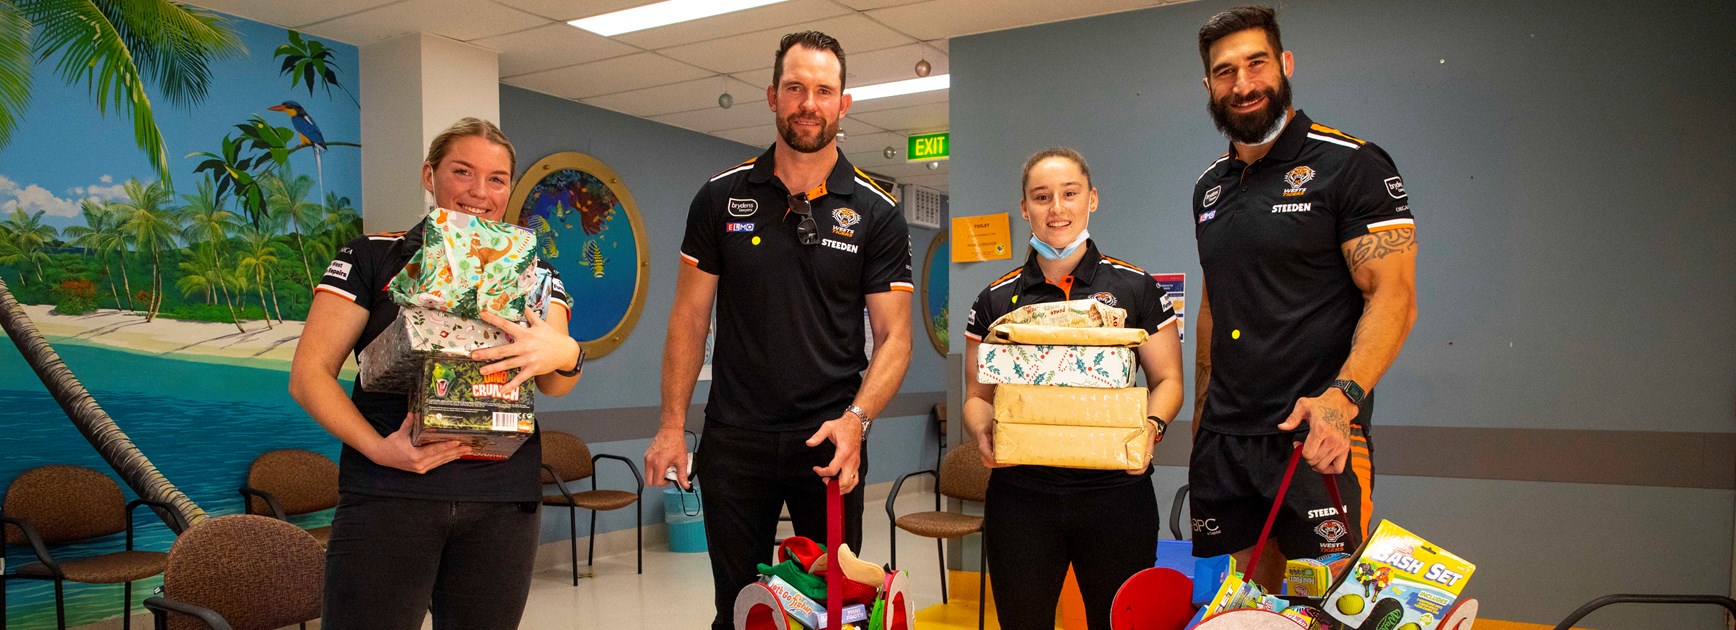 Wests Tigers spread Christmas joy at annual Toy Drive